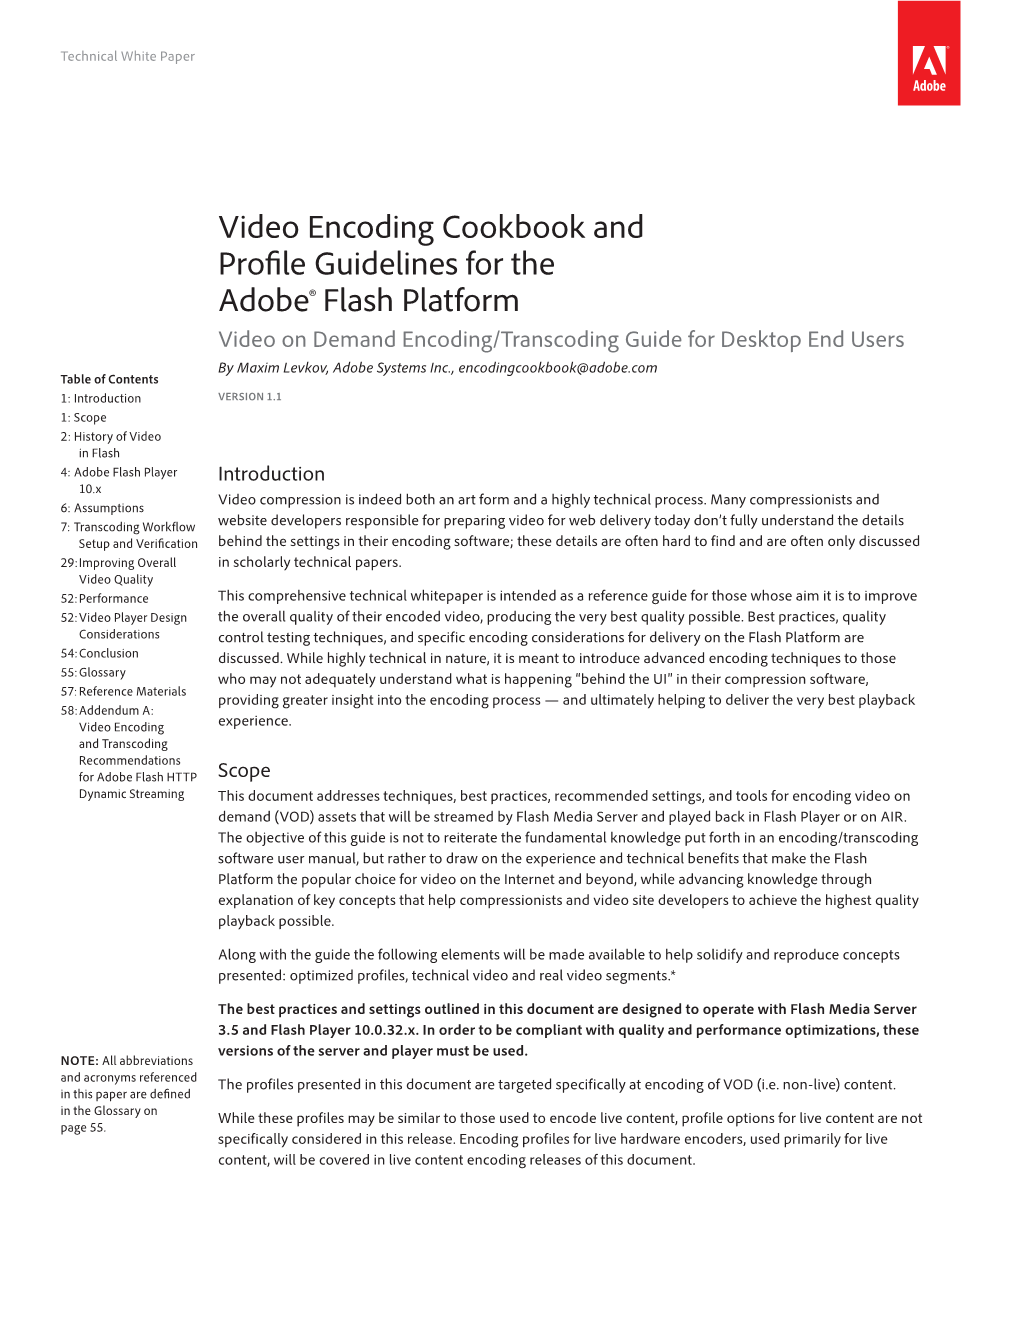 Video Encoding Cookbook and Profile Guidelines for the Adobe® Flash Platform